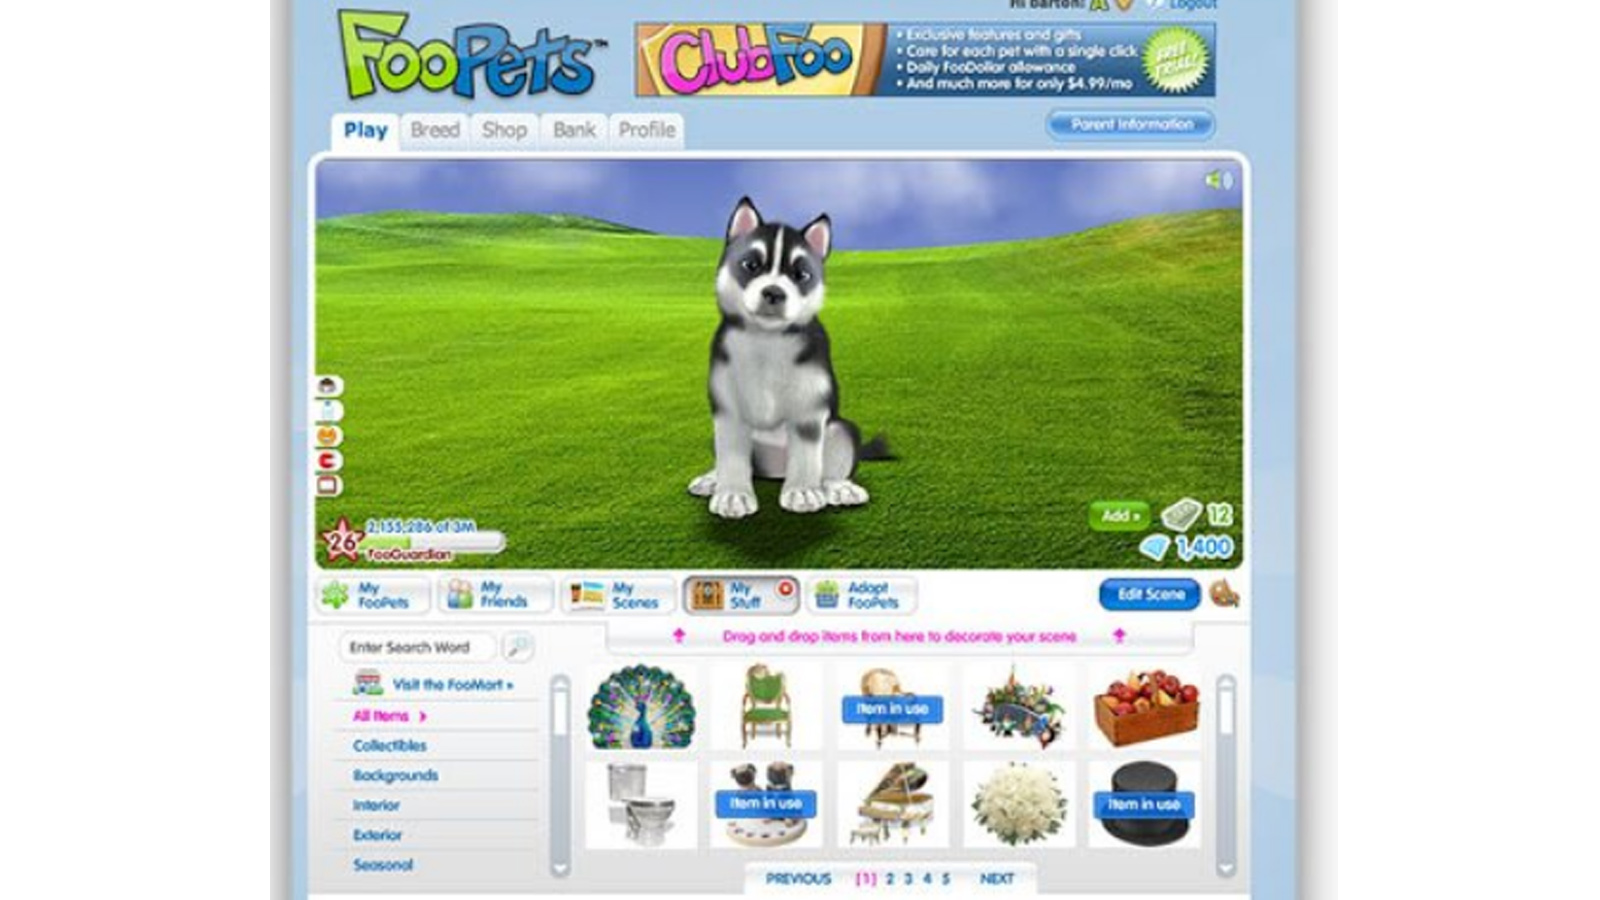 Find detailed information about FooPets